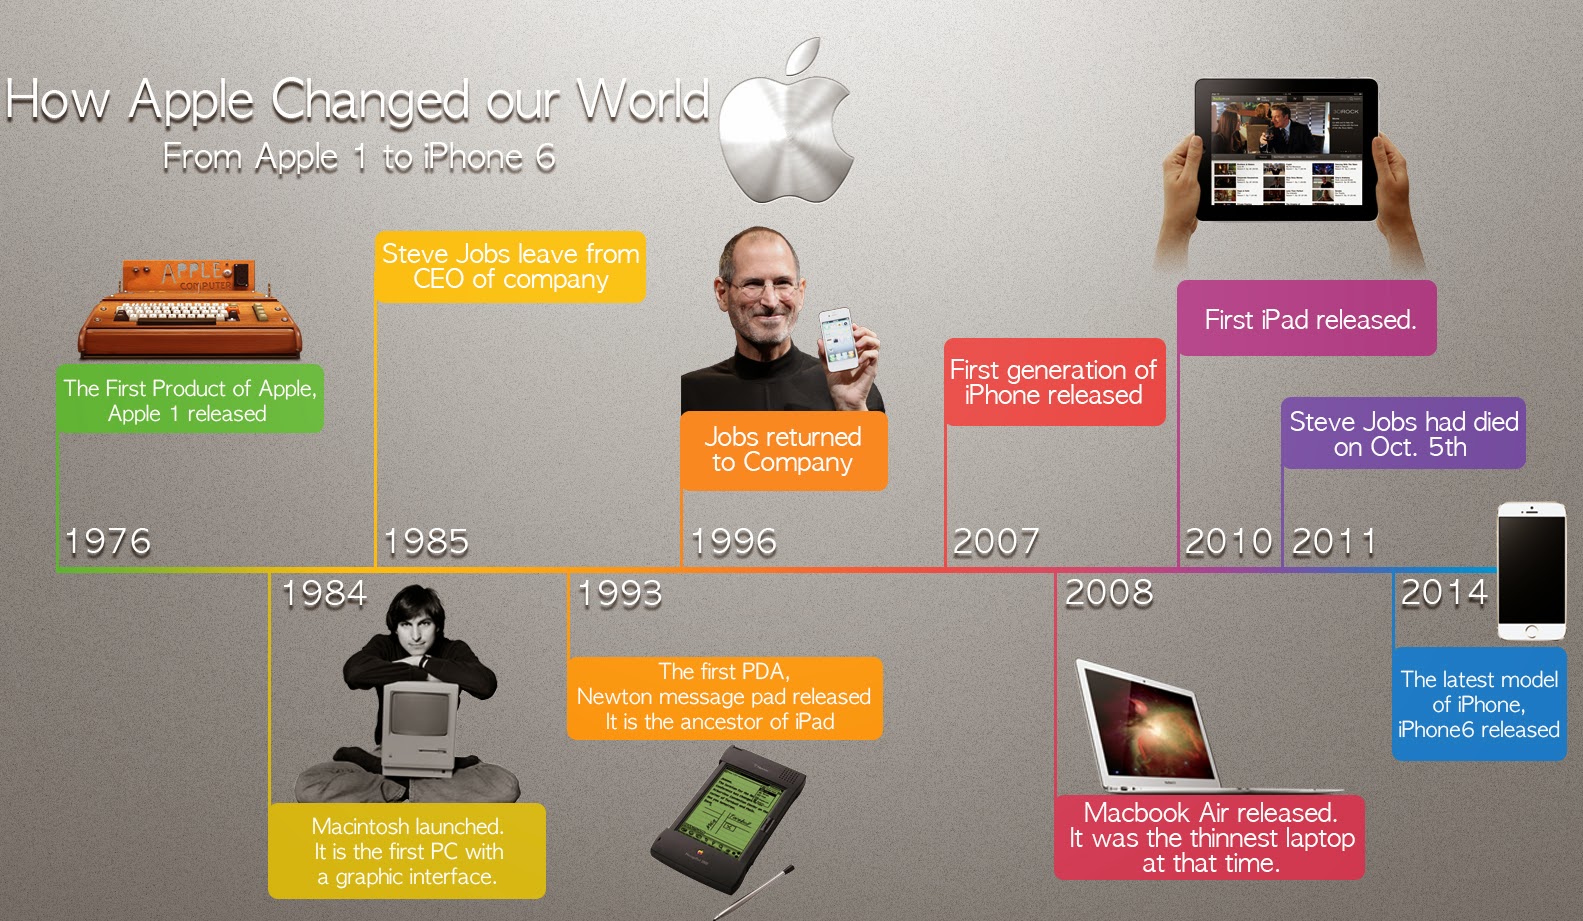 Oh my muse How Apple Changed our world Timeline of Apple Inc.